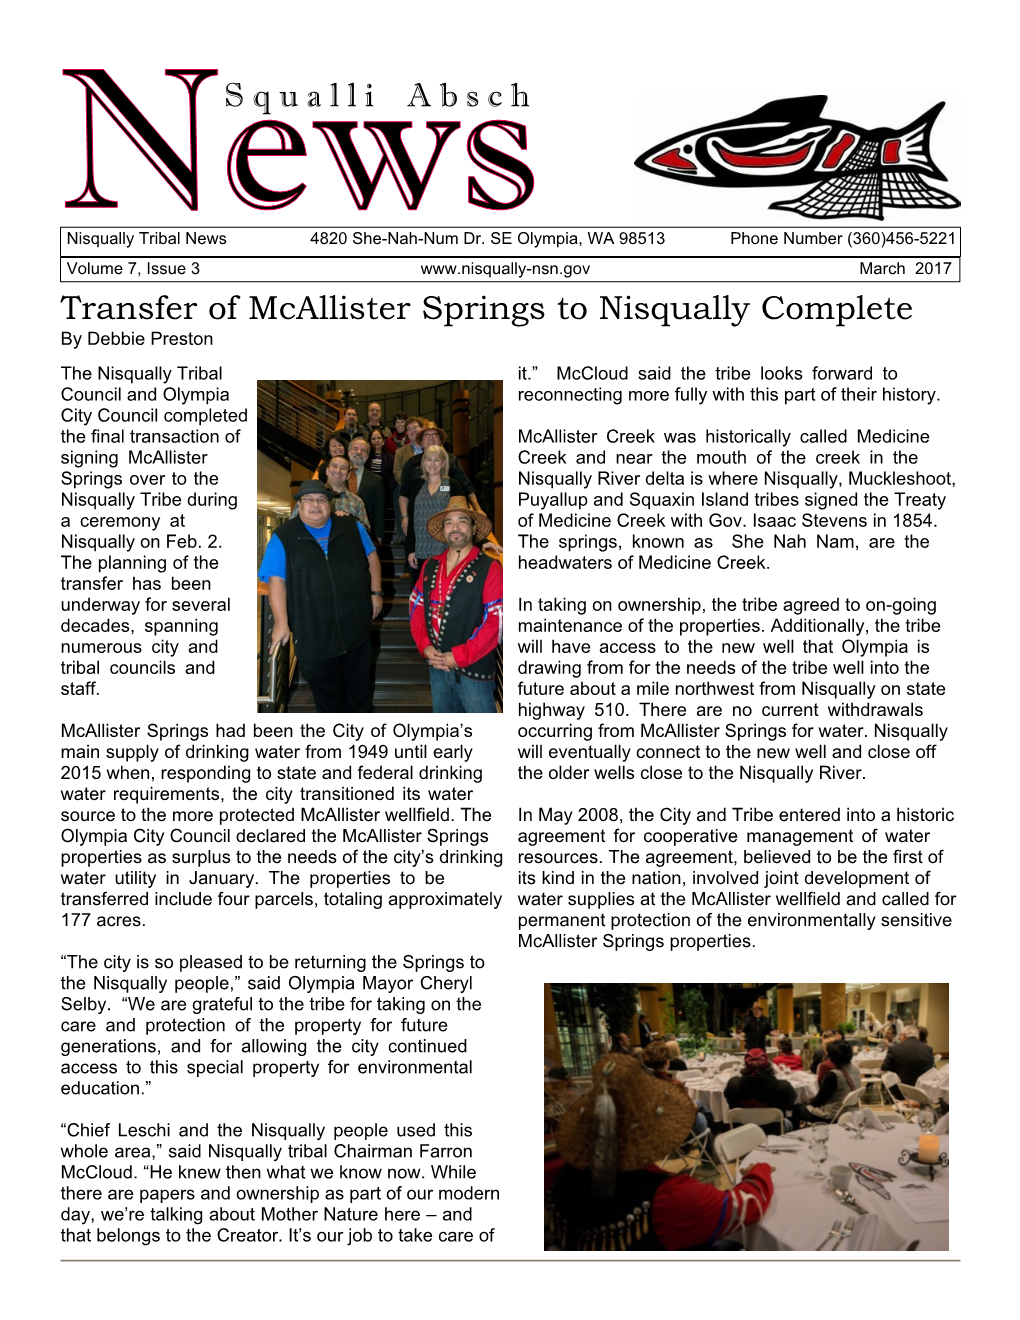 S Q U a L L I a B S C H Transfer of Mcallister Springs to Nisqually